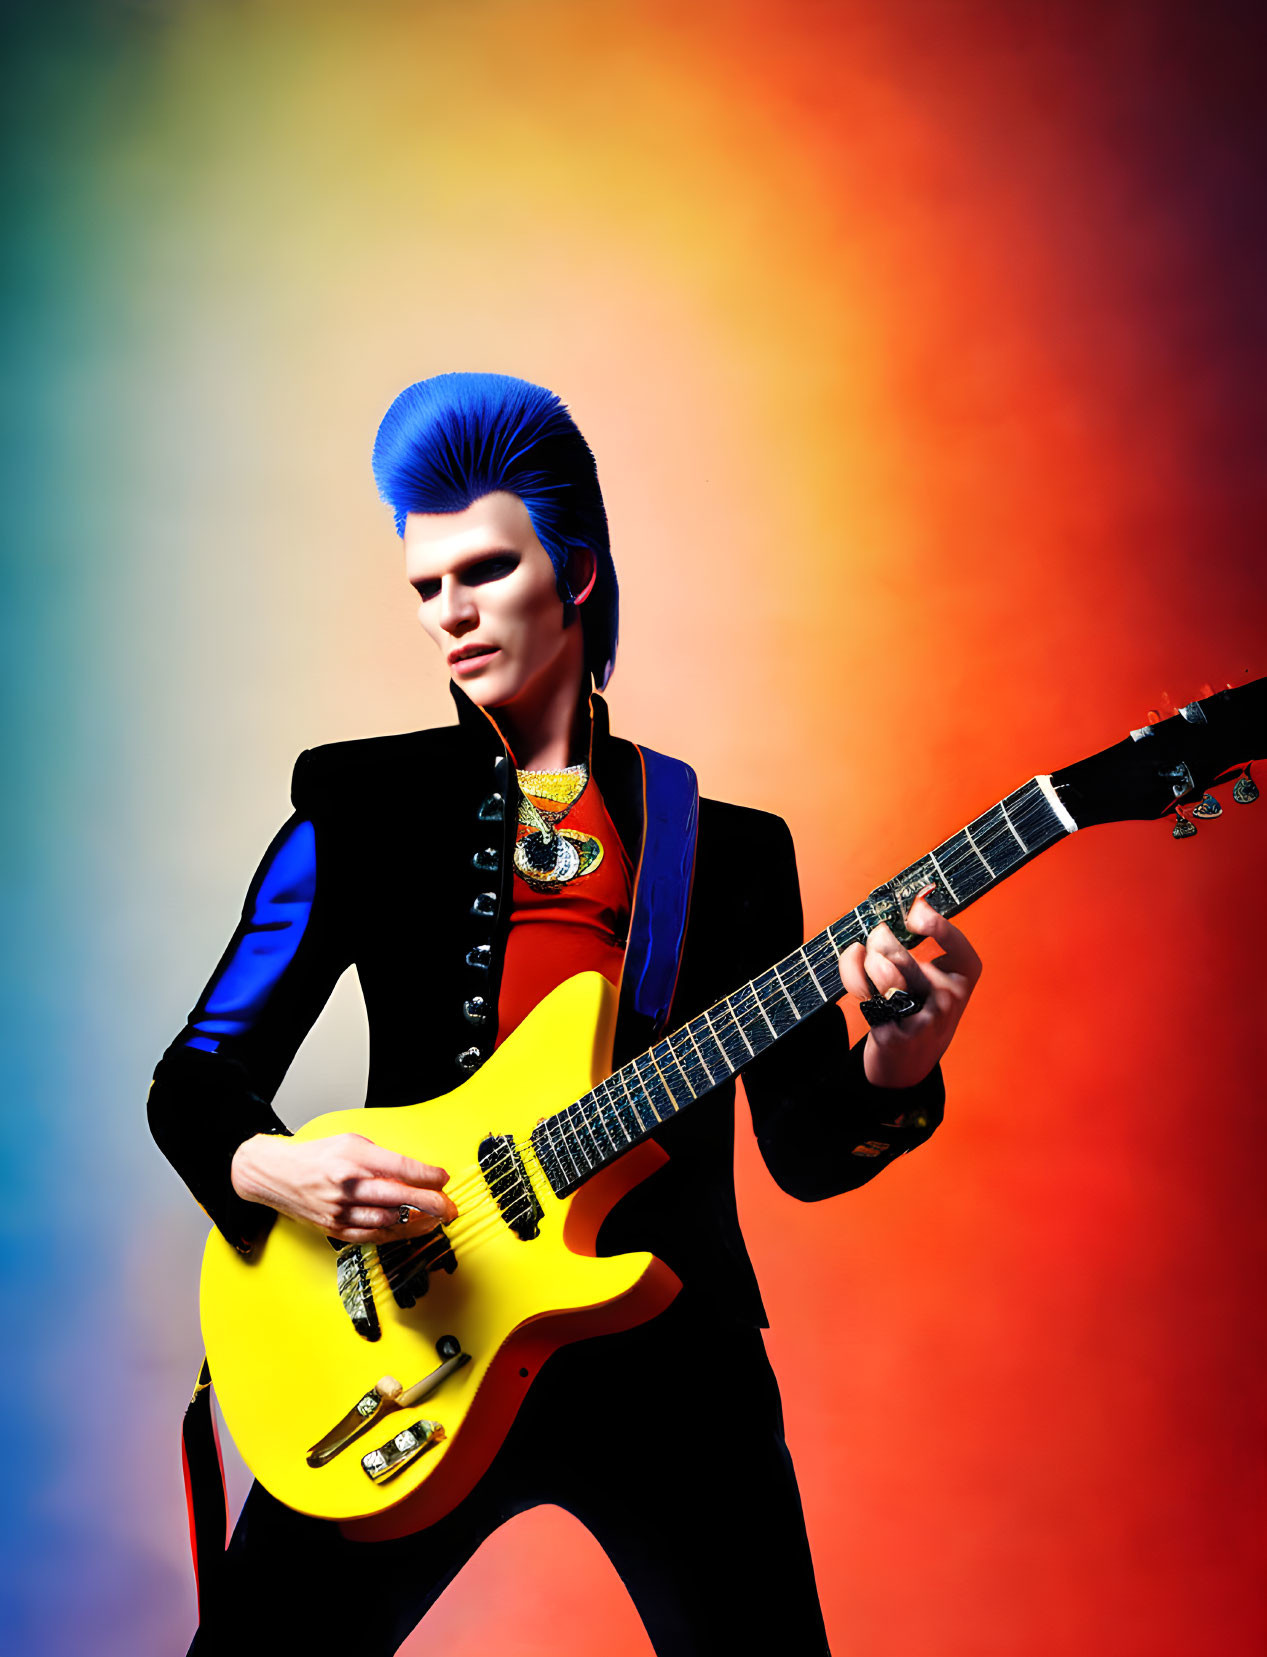 Vibrant blue mohawk person playing electric guitar on colorful gradient background